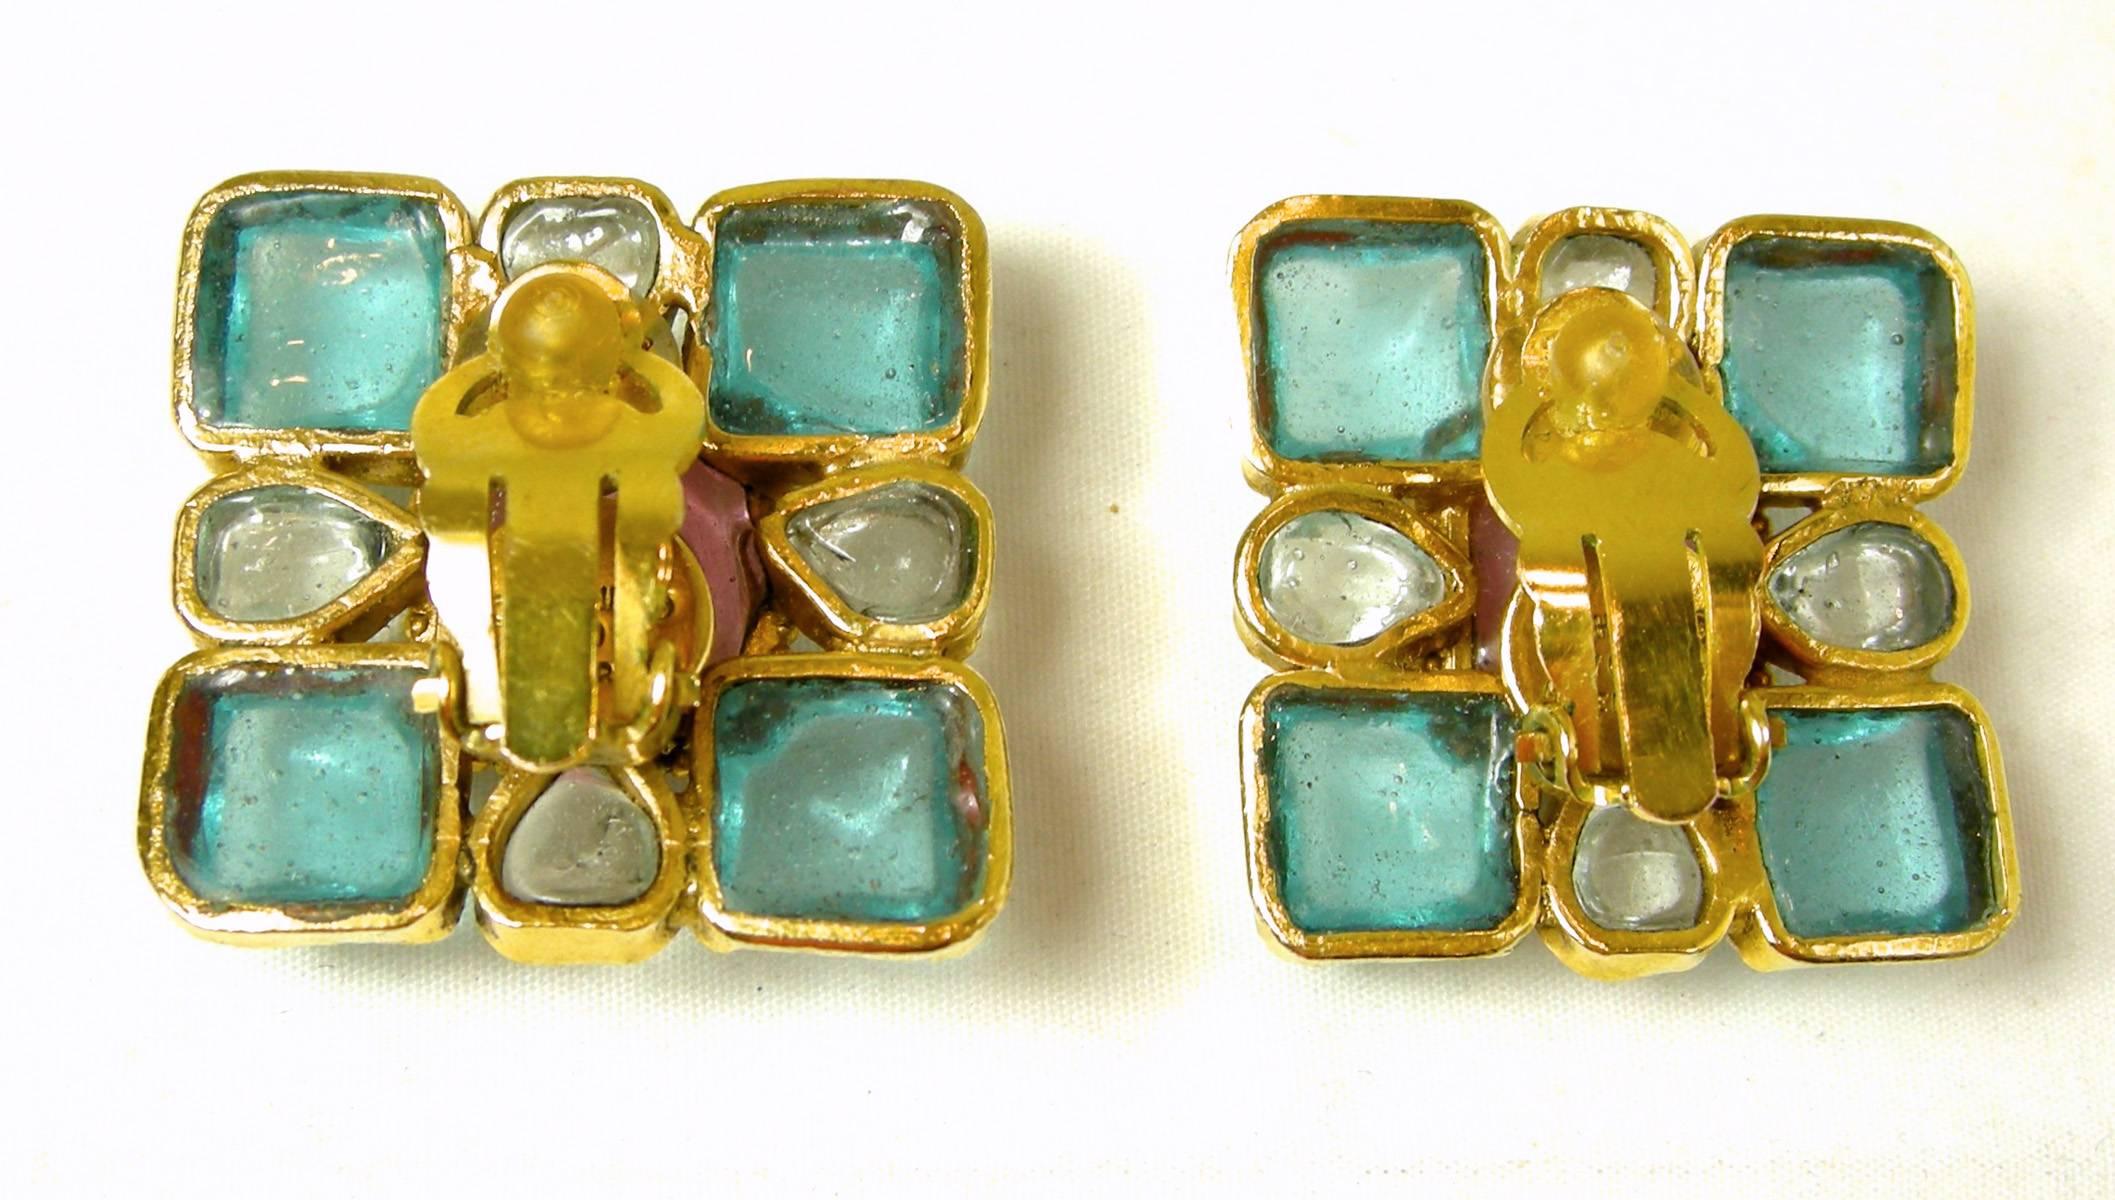 These are pair of charming pink, blue and clear Chanel Gripoix glass earrings that are oval and square in shape. They are set in a gold tone setting and measures 1-1/8” x 1-1/8”.  It is signed “Chanel” 97 P made in France”.